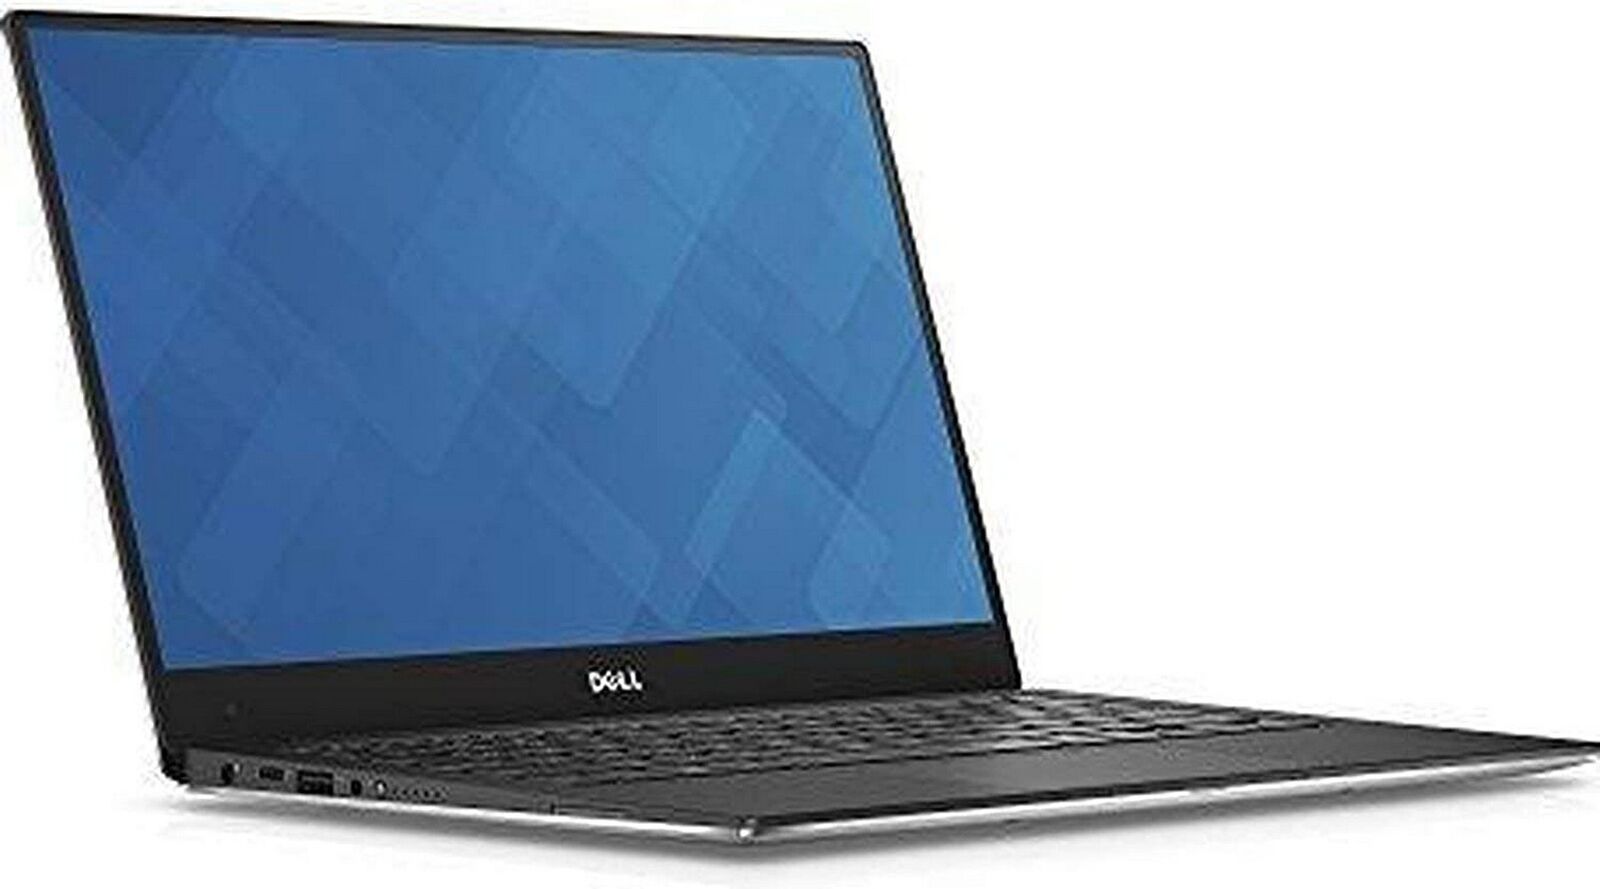 Impaired Dell XPS 9360 13.3, 256GB, 8GB RAM, i5-7200U, HD Graphics 620, NOOS